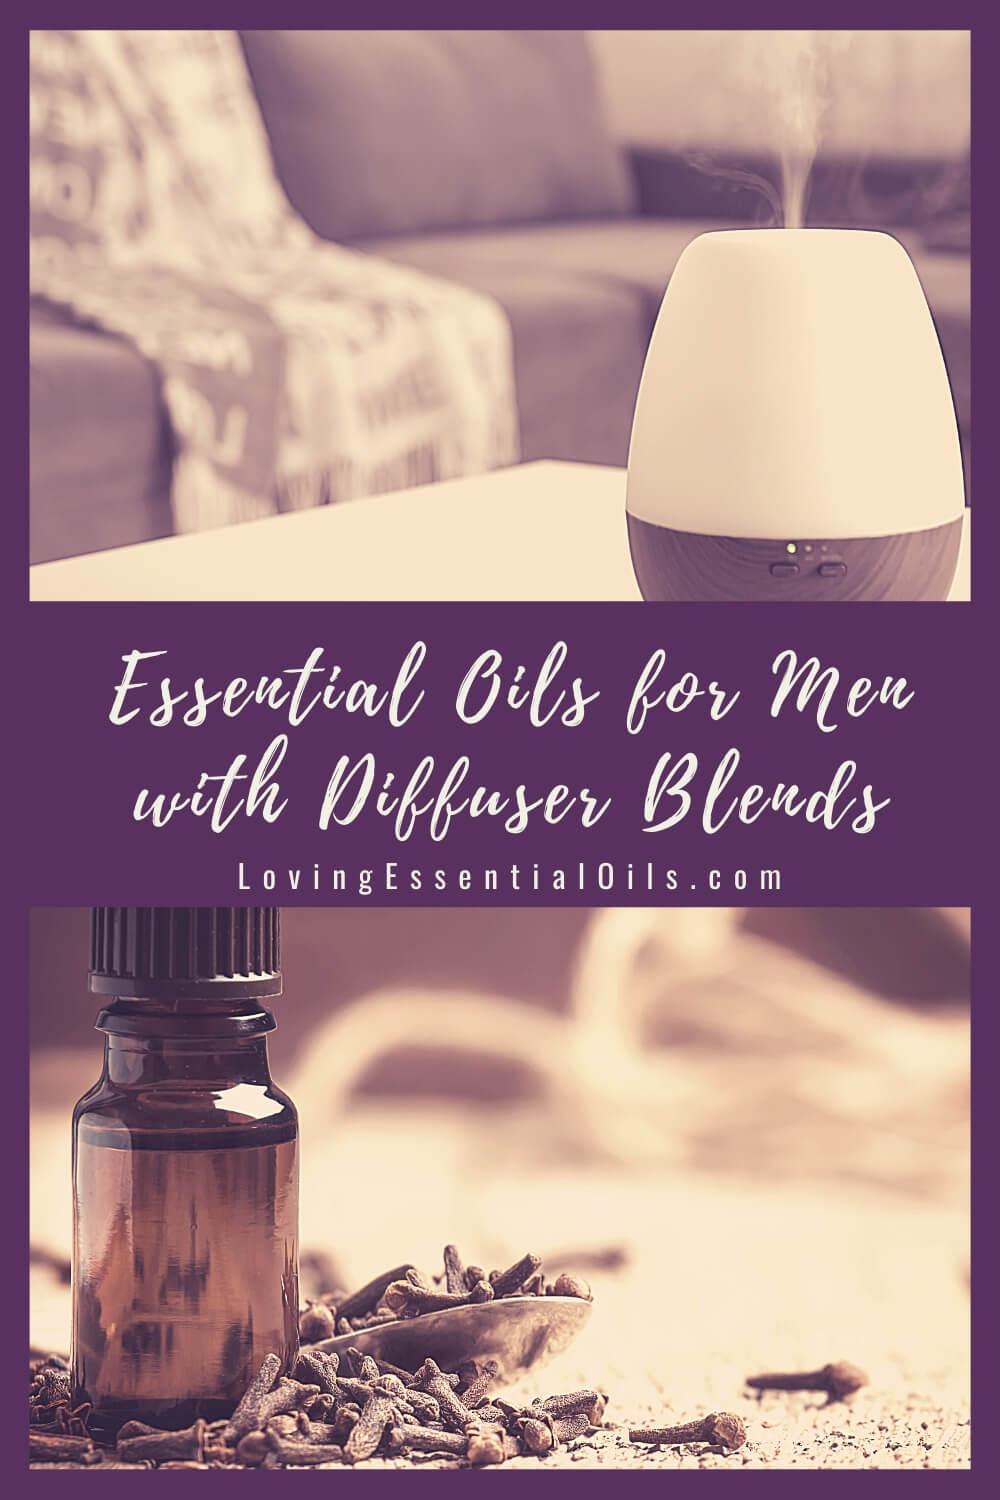 Masculine Diffuser Blends Instagram Stories for Him Young Living Brand  Partner Oily Marketing Business Tools 